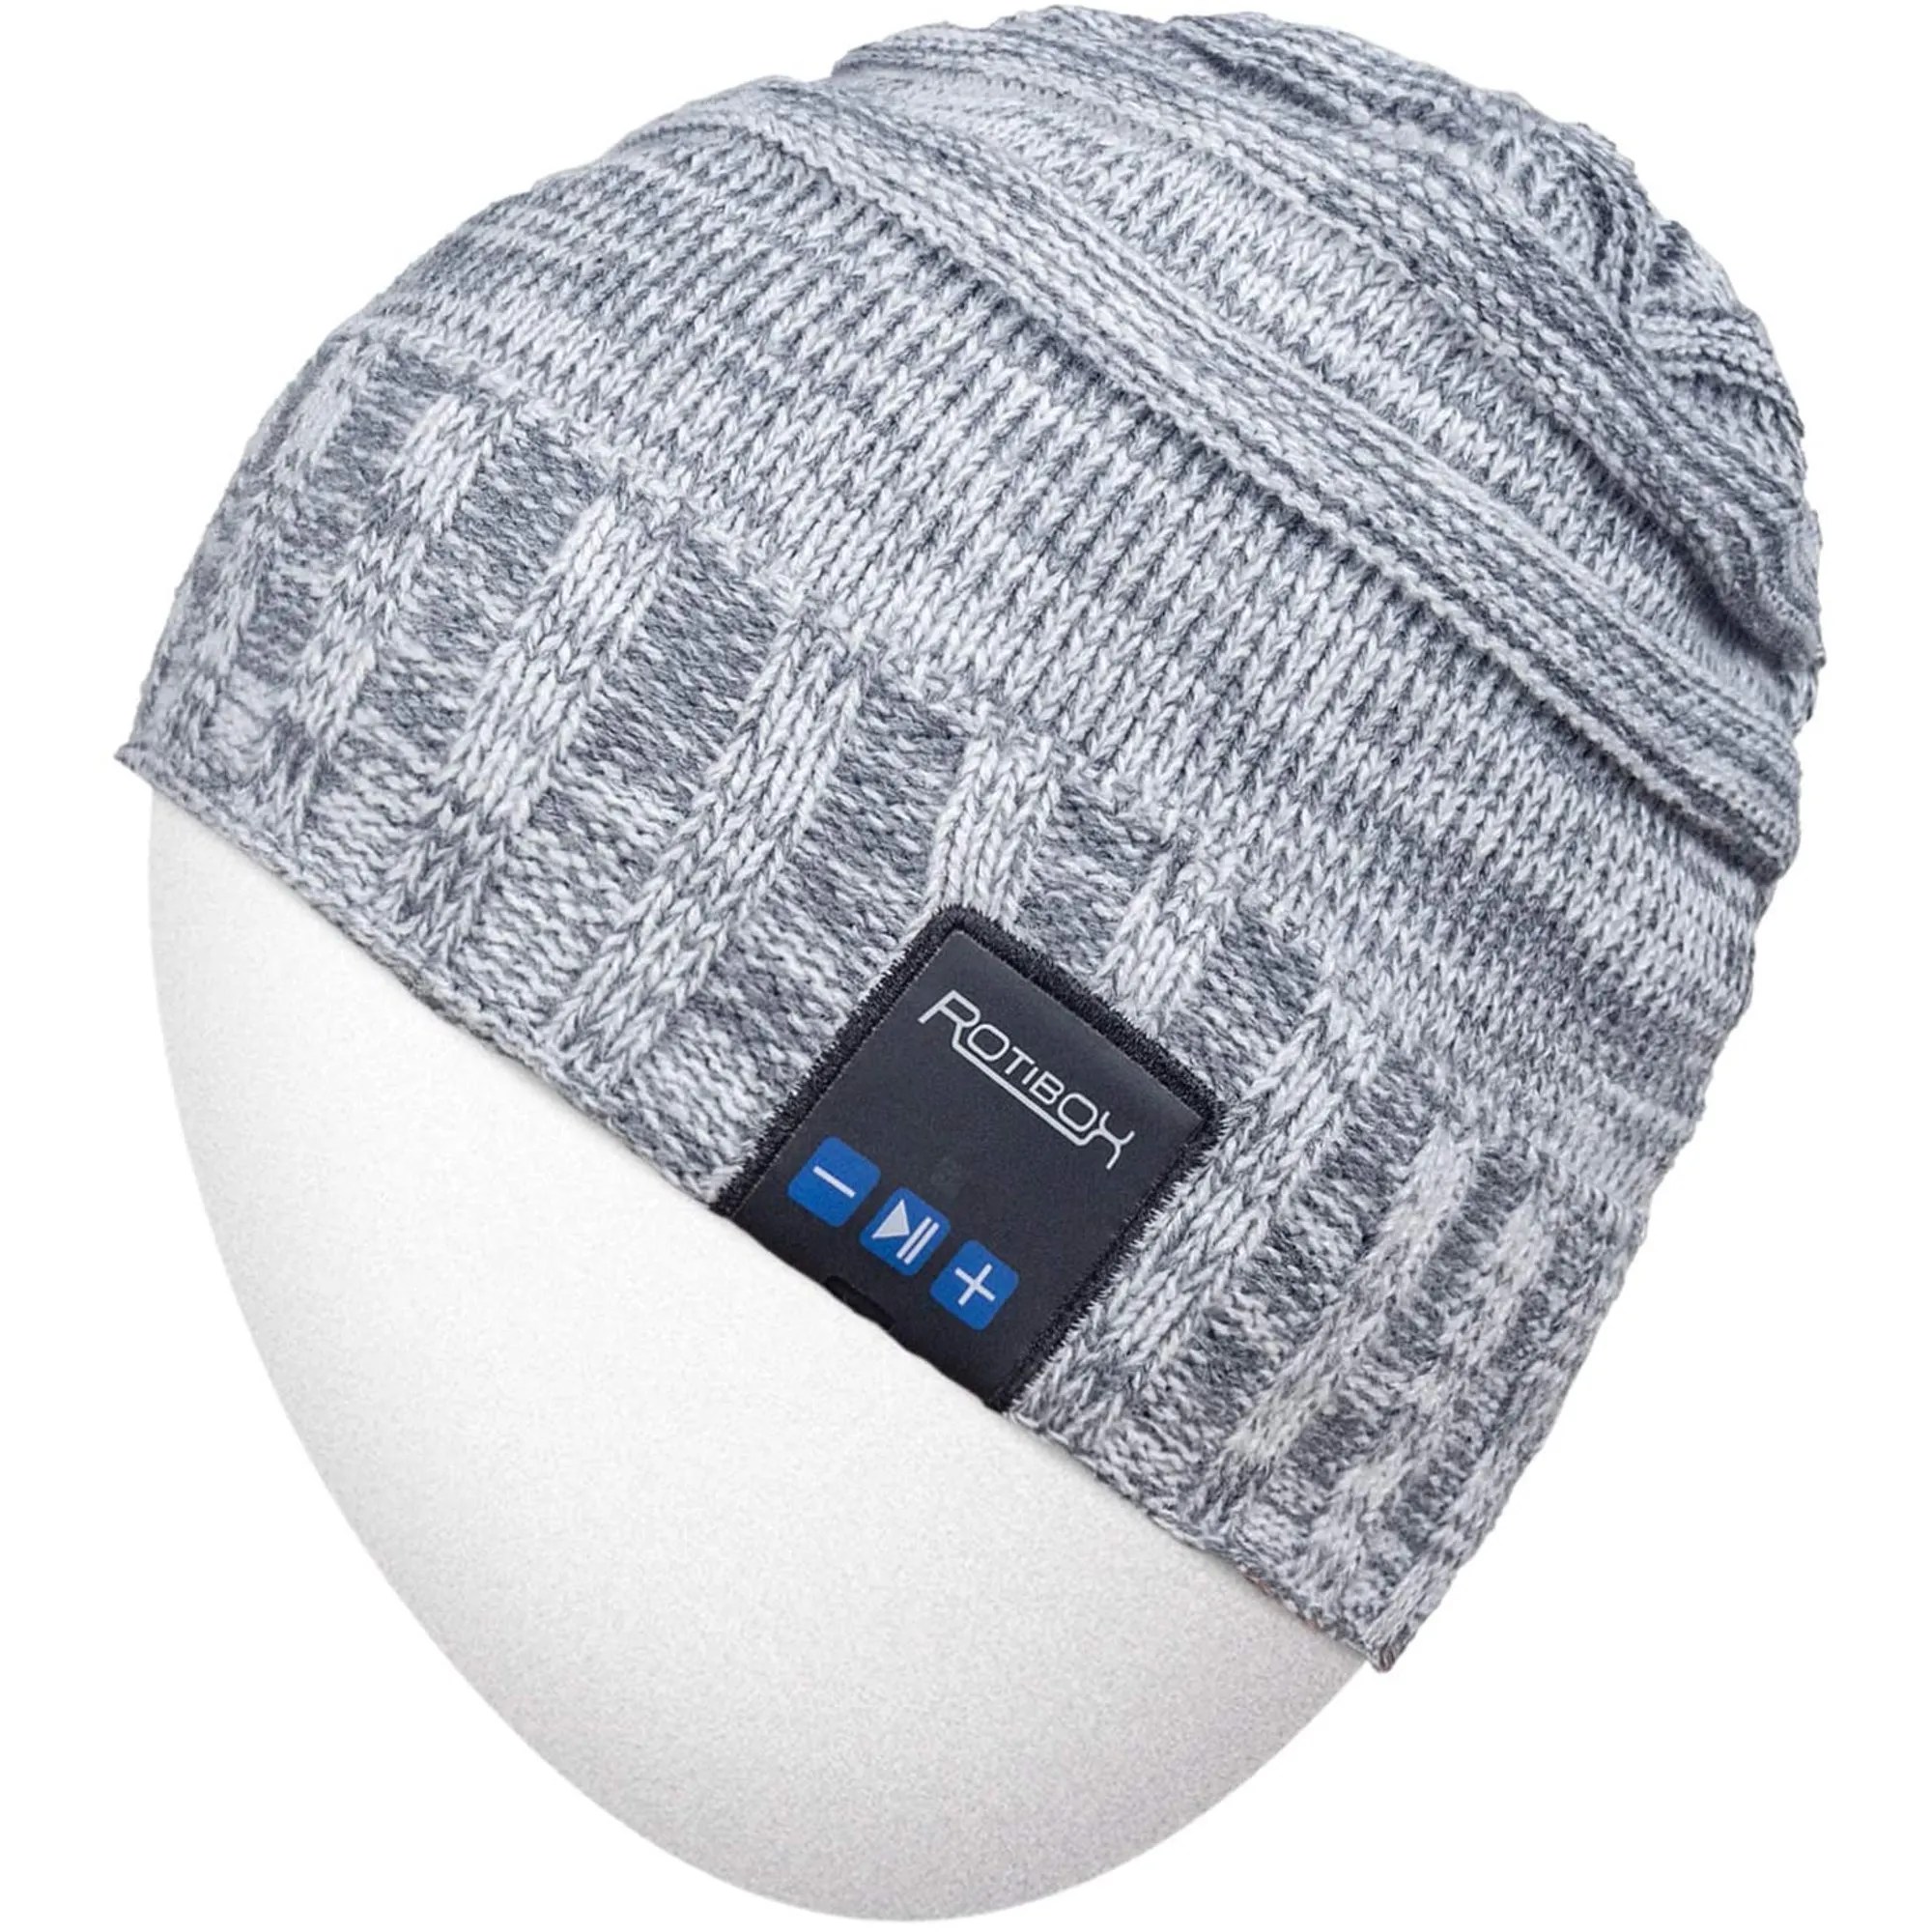 The 10 Best Bluetooth Beanies of 2022